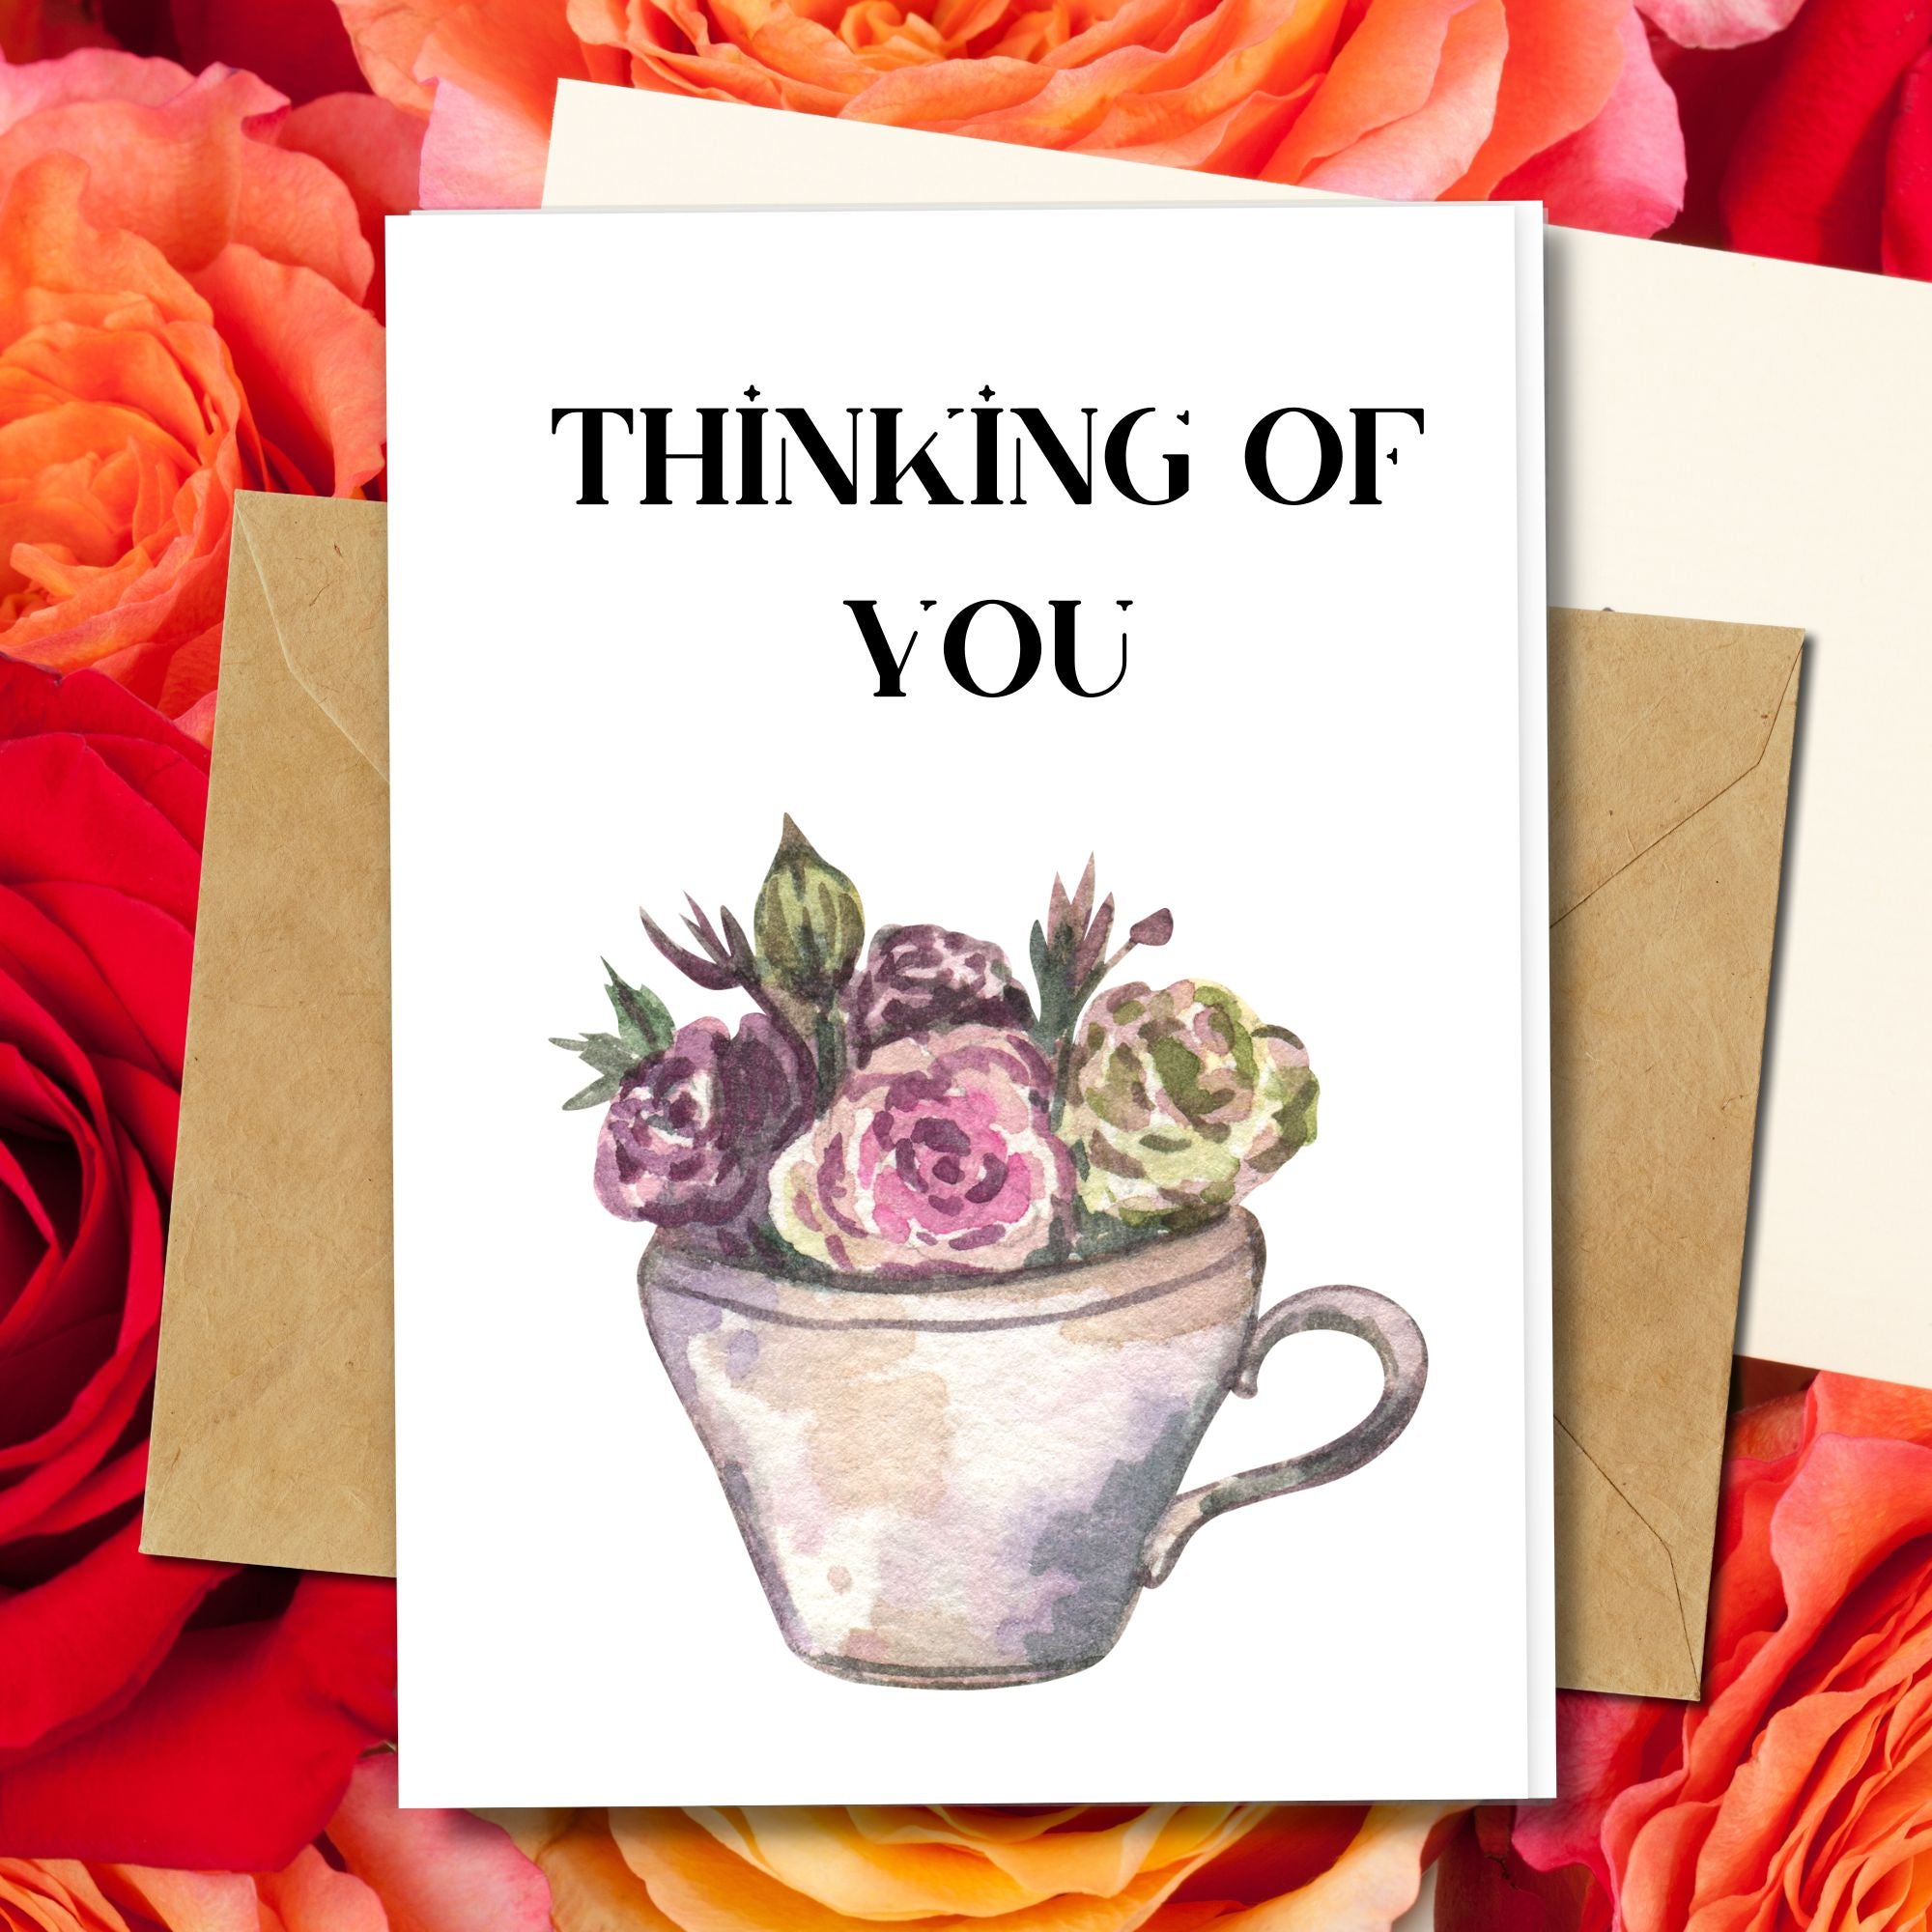 eco friendly handmade greeting card thinking of you with a tea cup design made in seed paper, cotton paper, tea paper and more